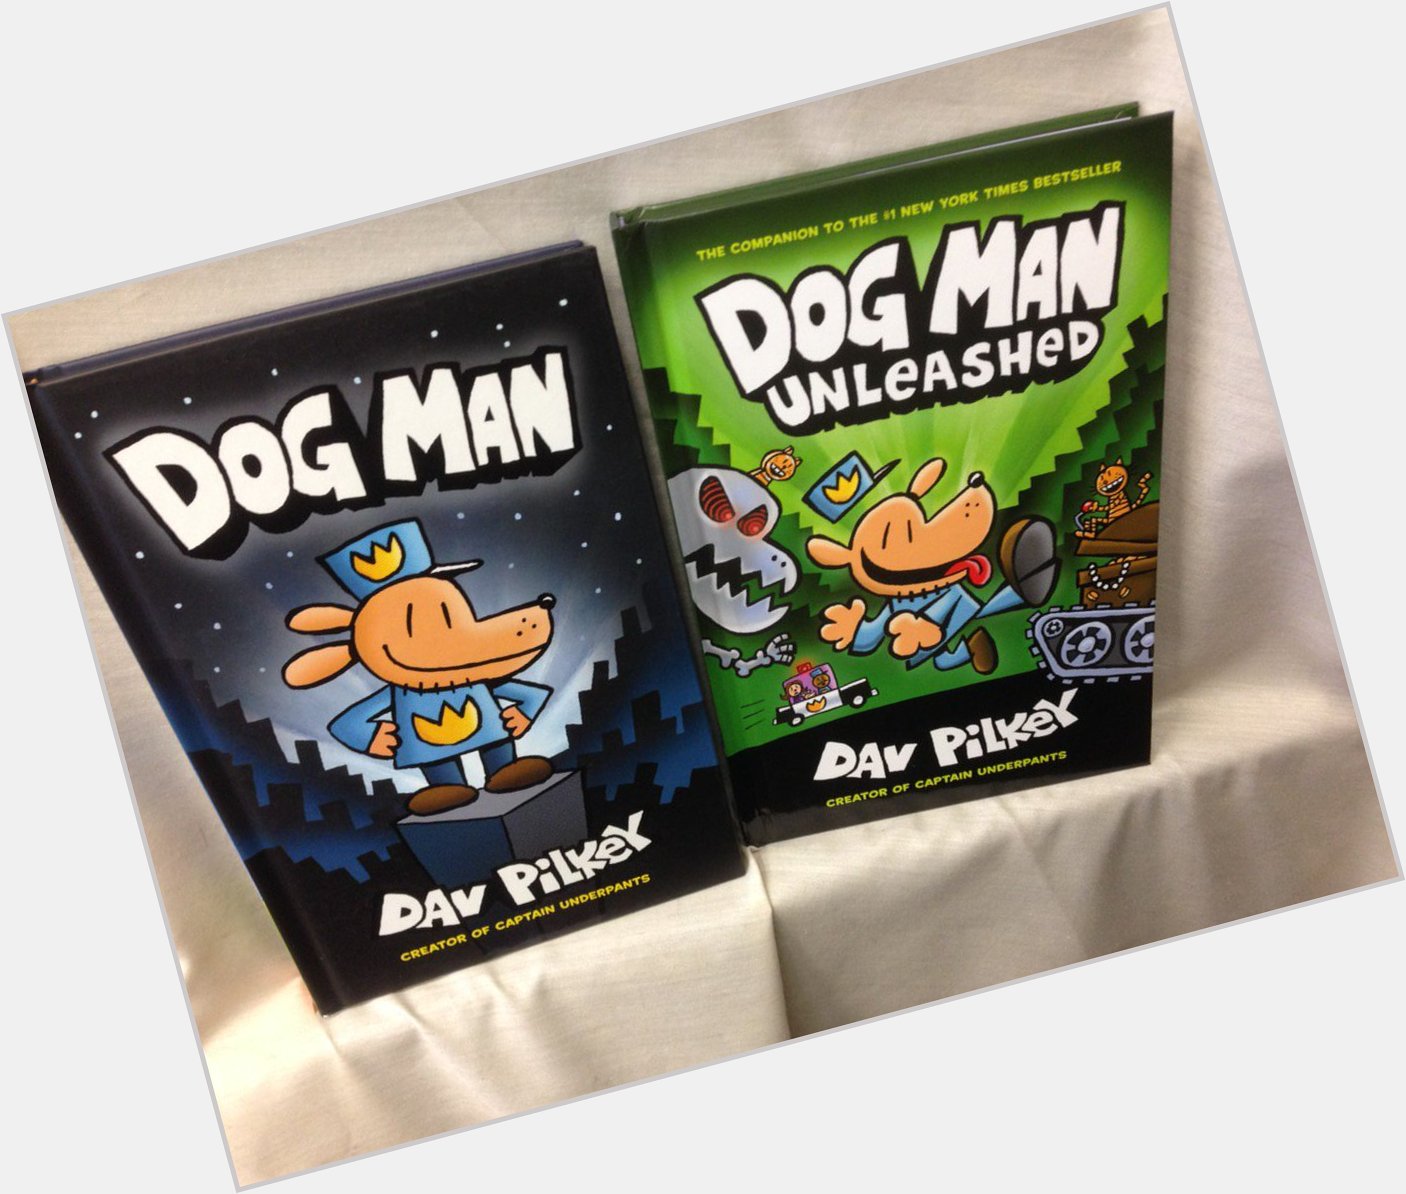 Happy Birthday Dav Pilkey! Have you introduced your readers to Dog Man? 